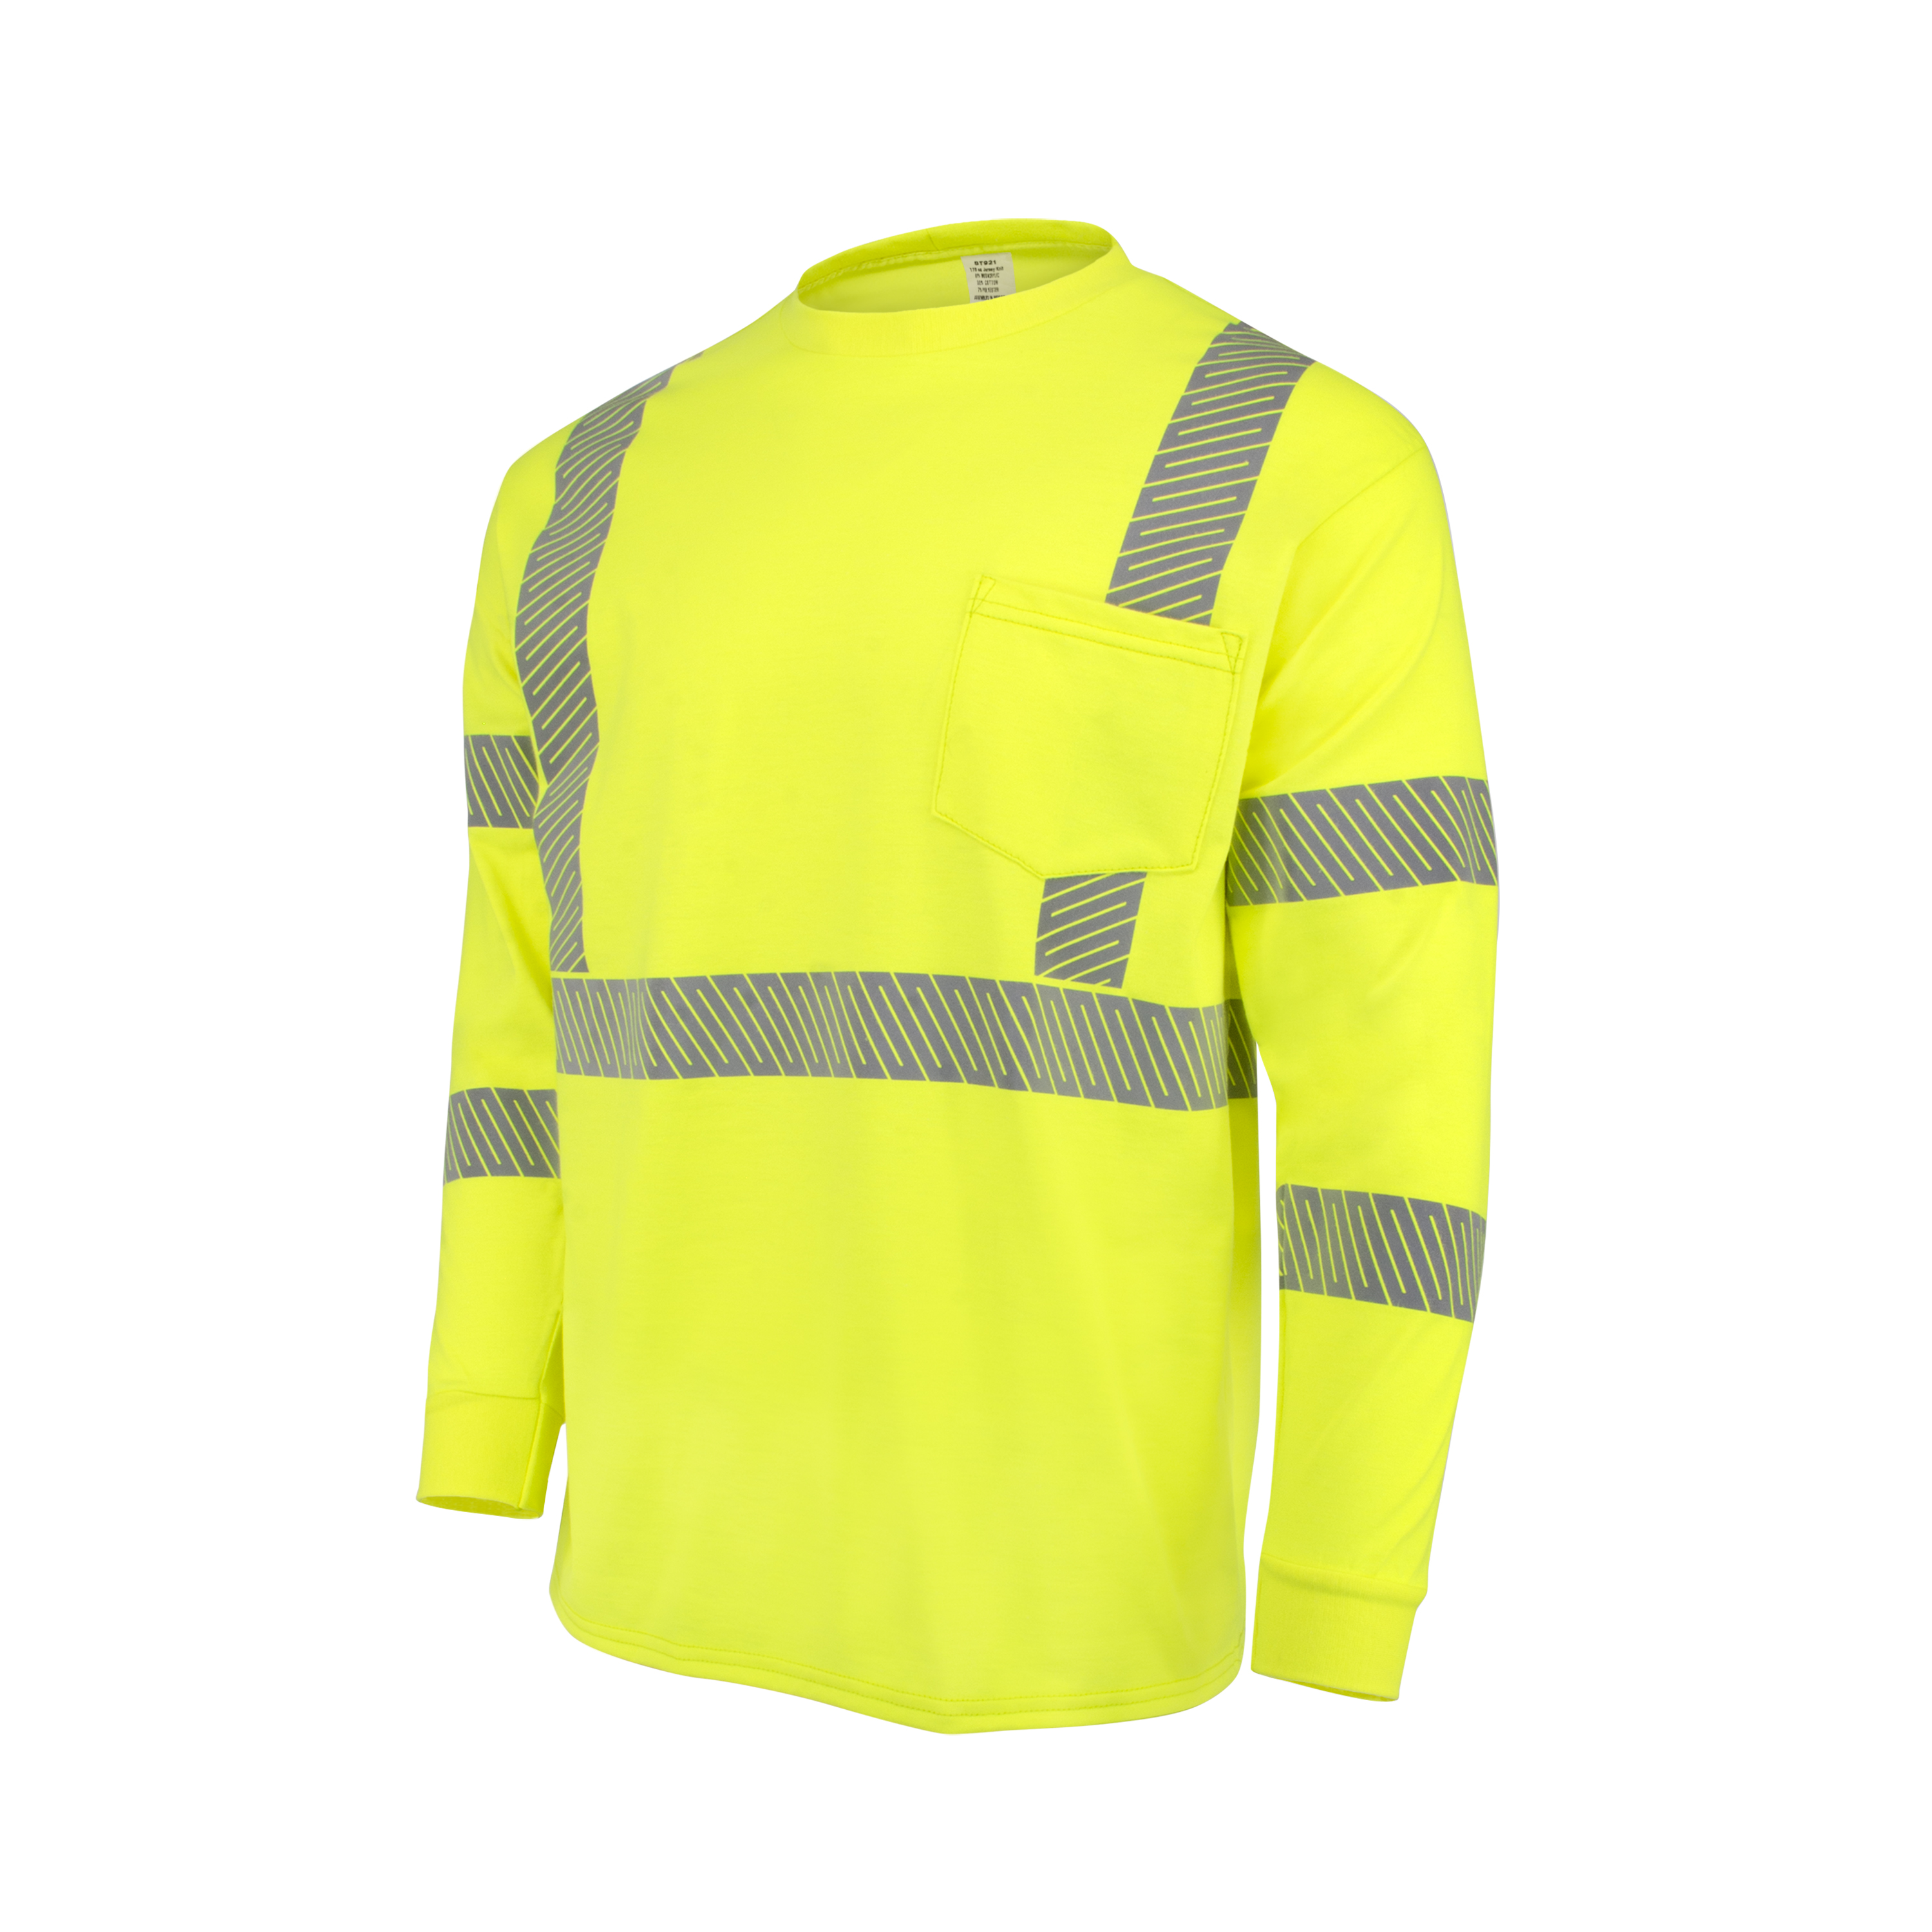 Radians ST921 7.75 oz Class 3 Long Sleeve FR T-shirt with Segmented Reflective Tape